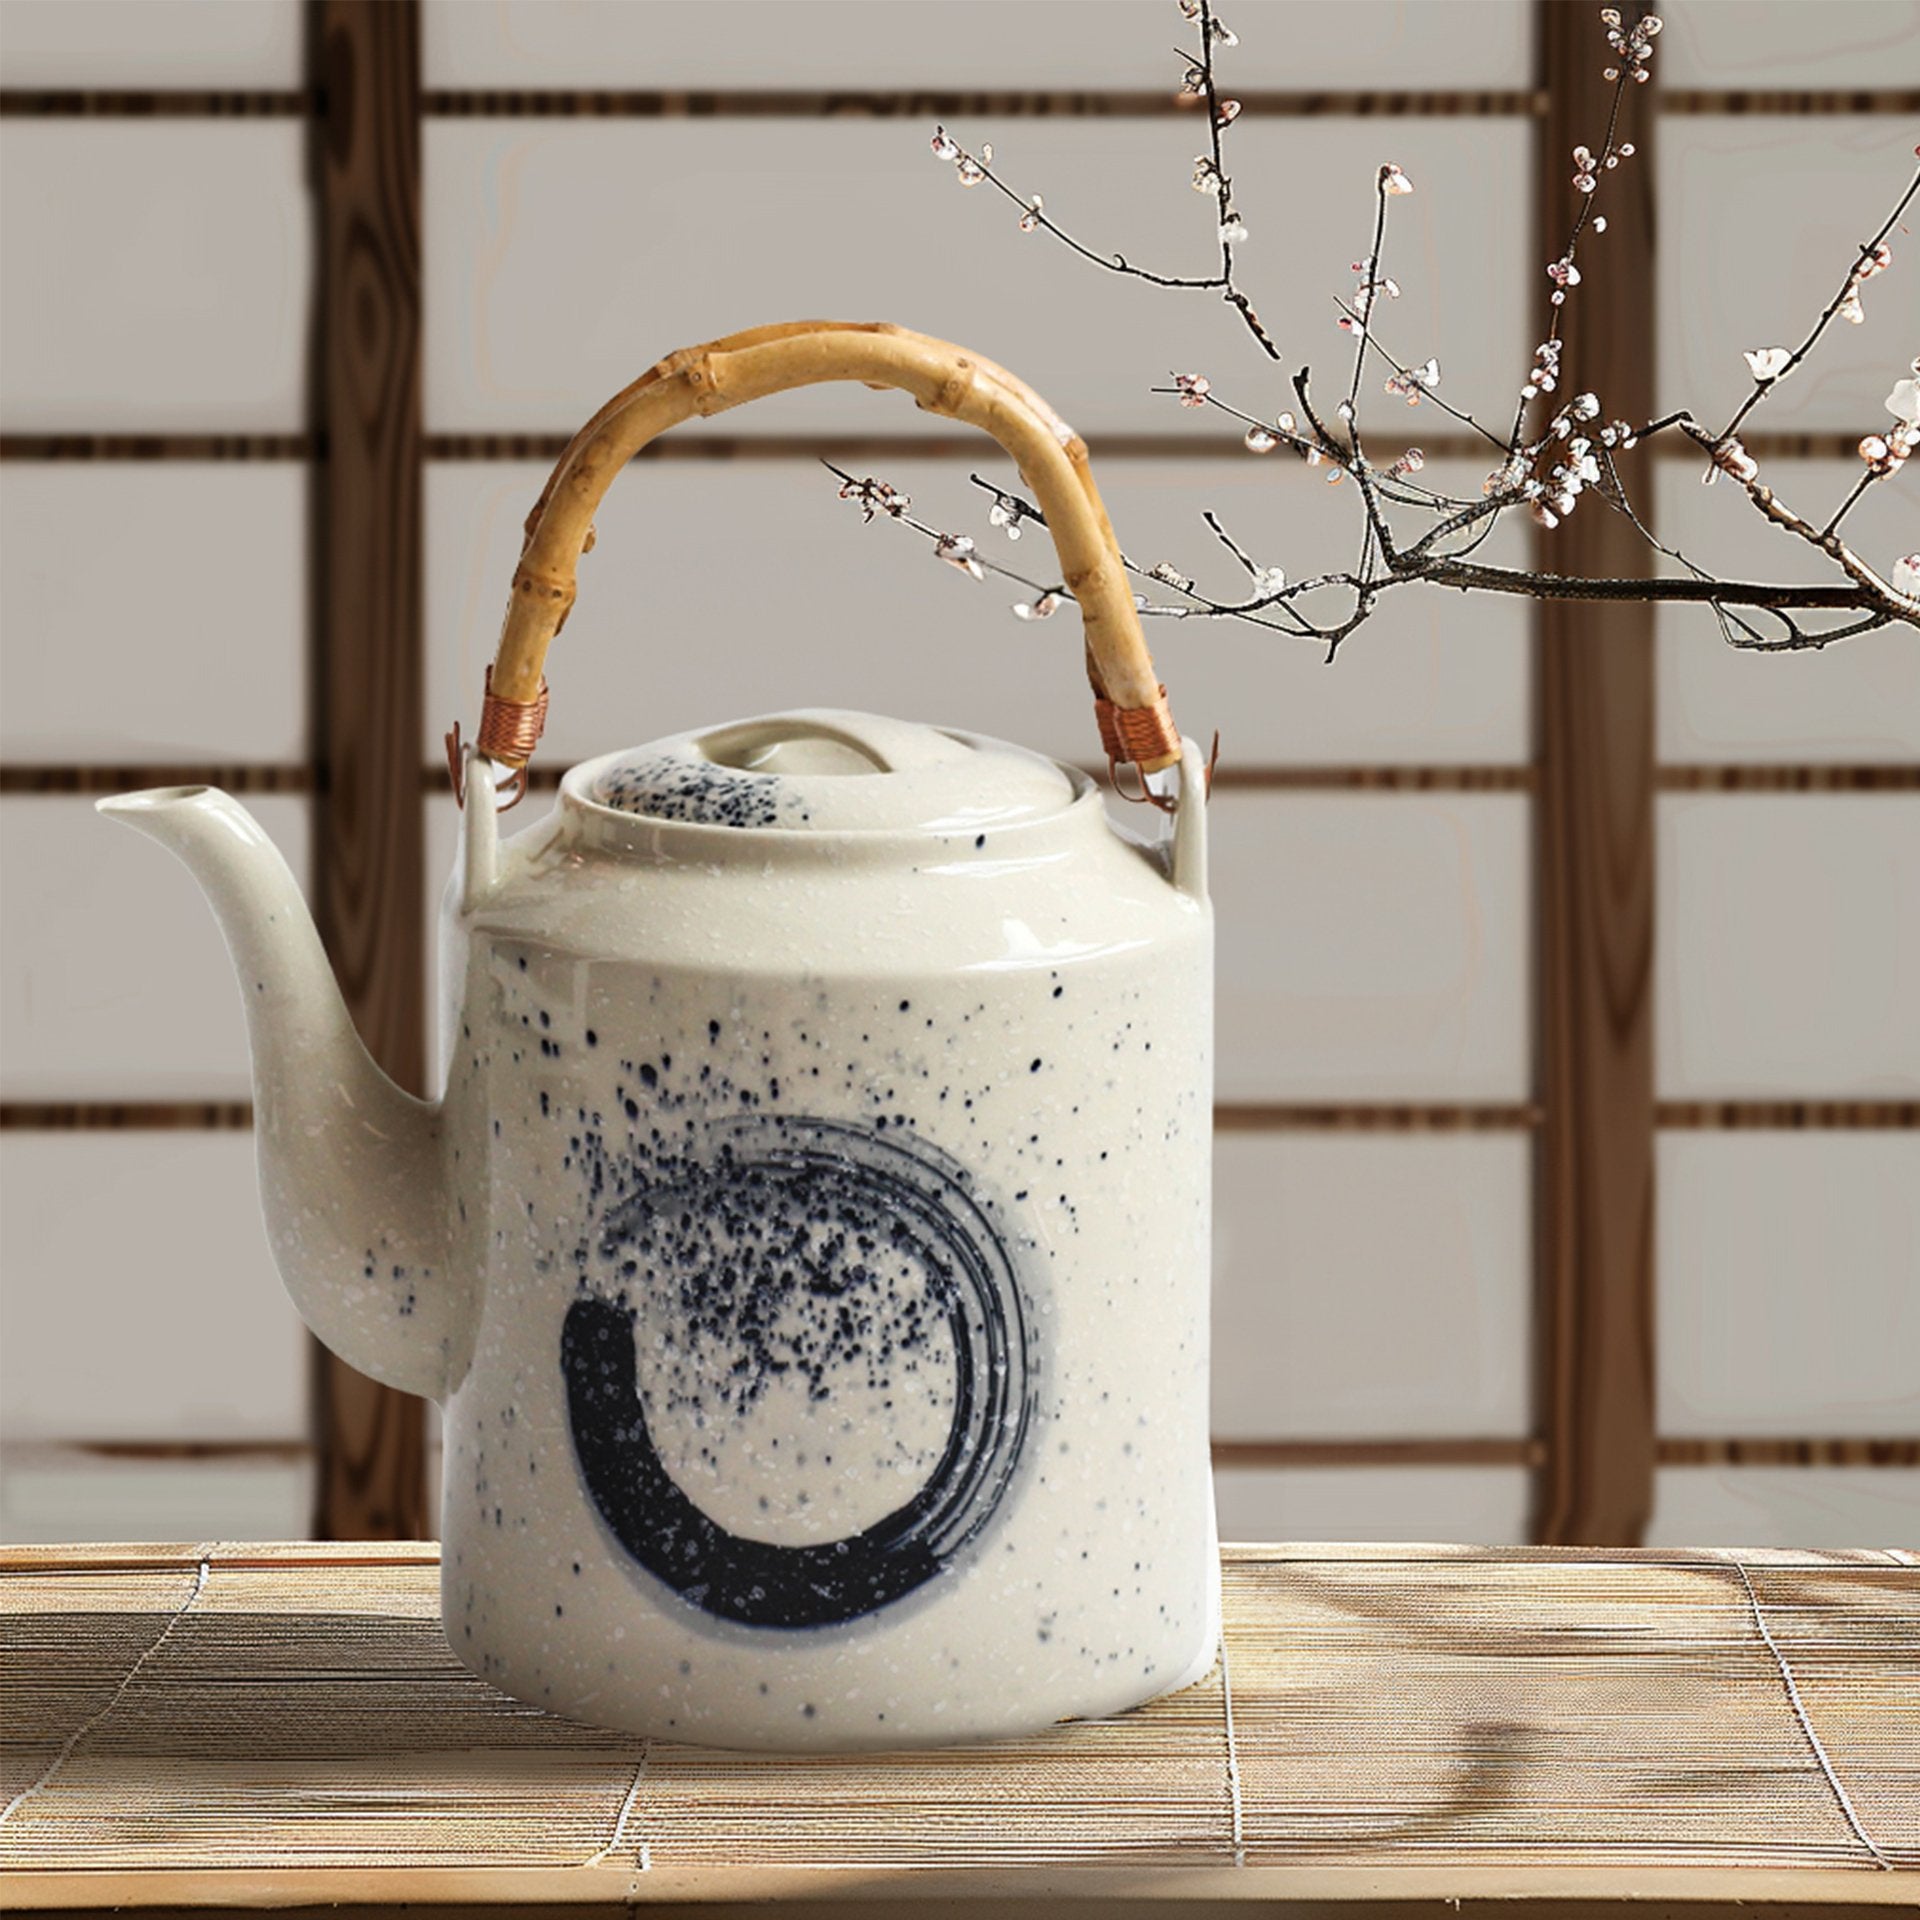 White square teapot with black swirl on a tatami mat with cherry blossoms.